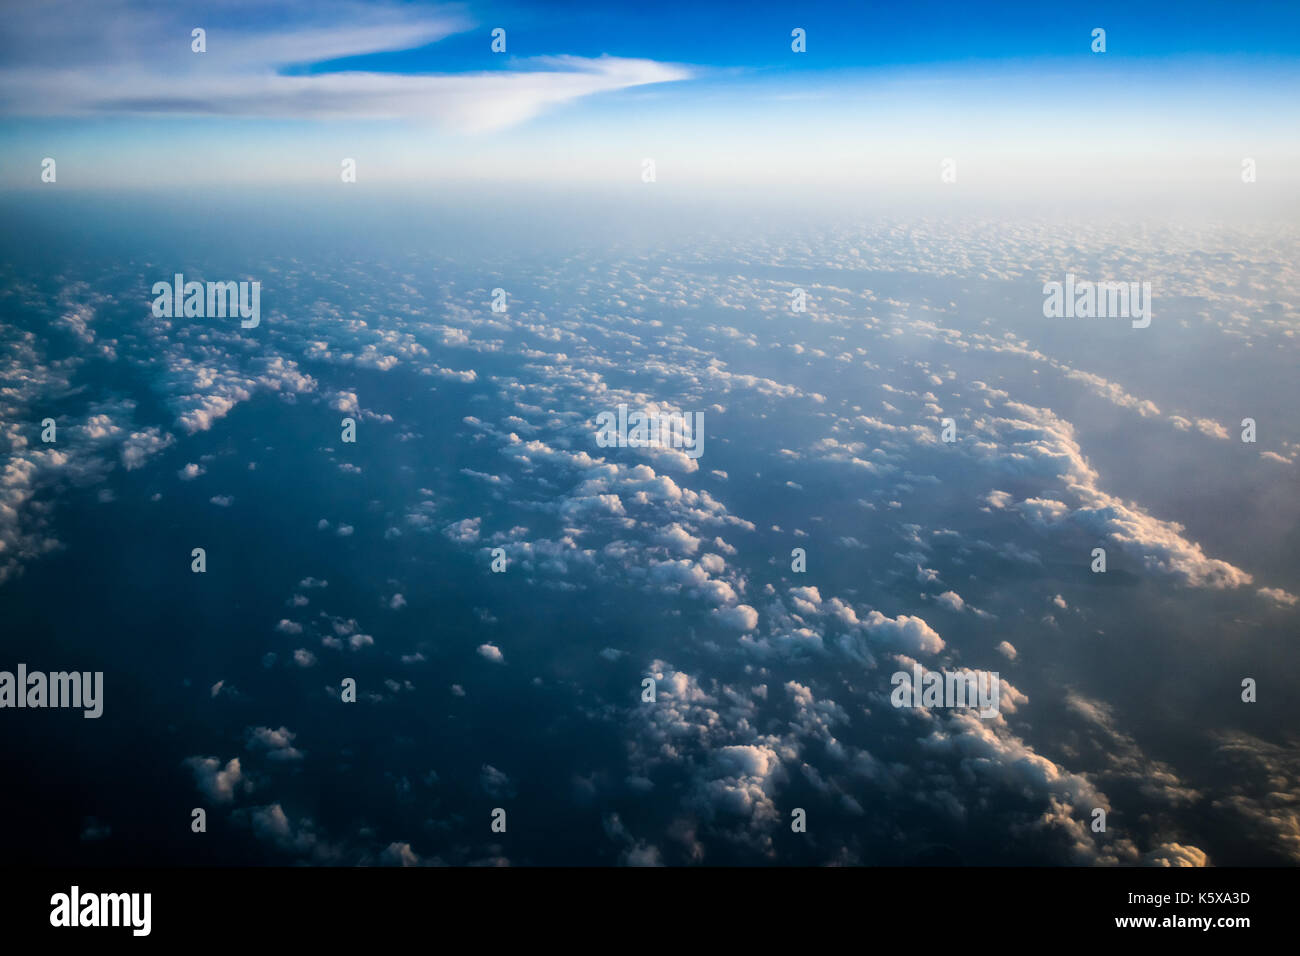 Clouds in sky atmosphere panorama Stock Photo